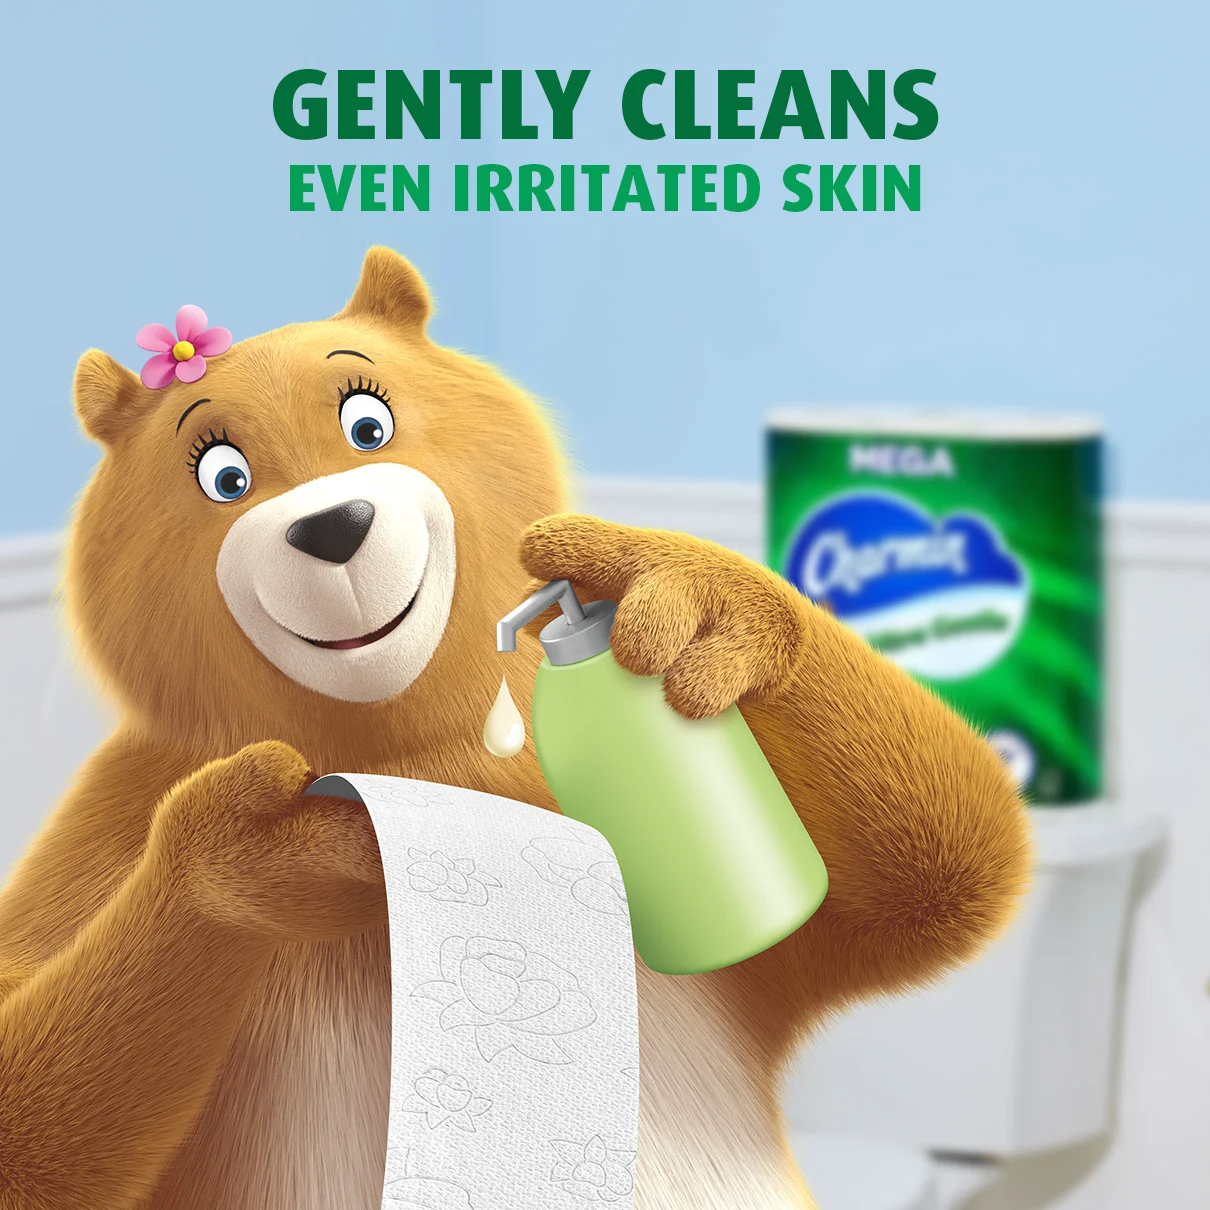 Touch of soothing lotion on every sheet from ultra gentle toilet paper